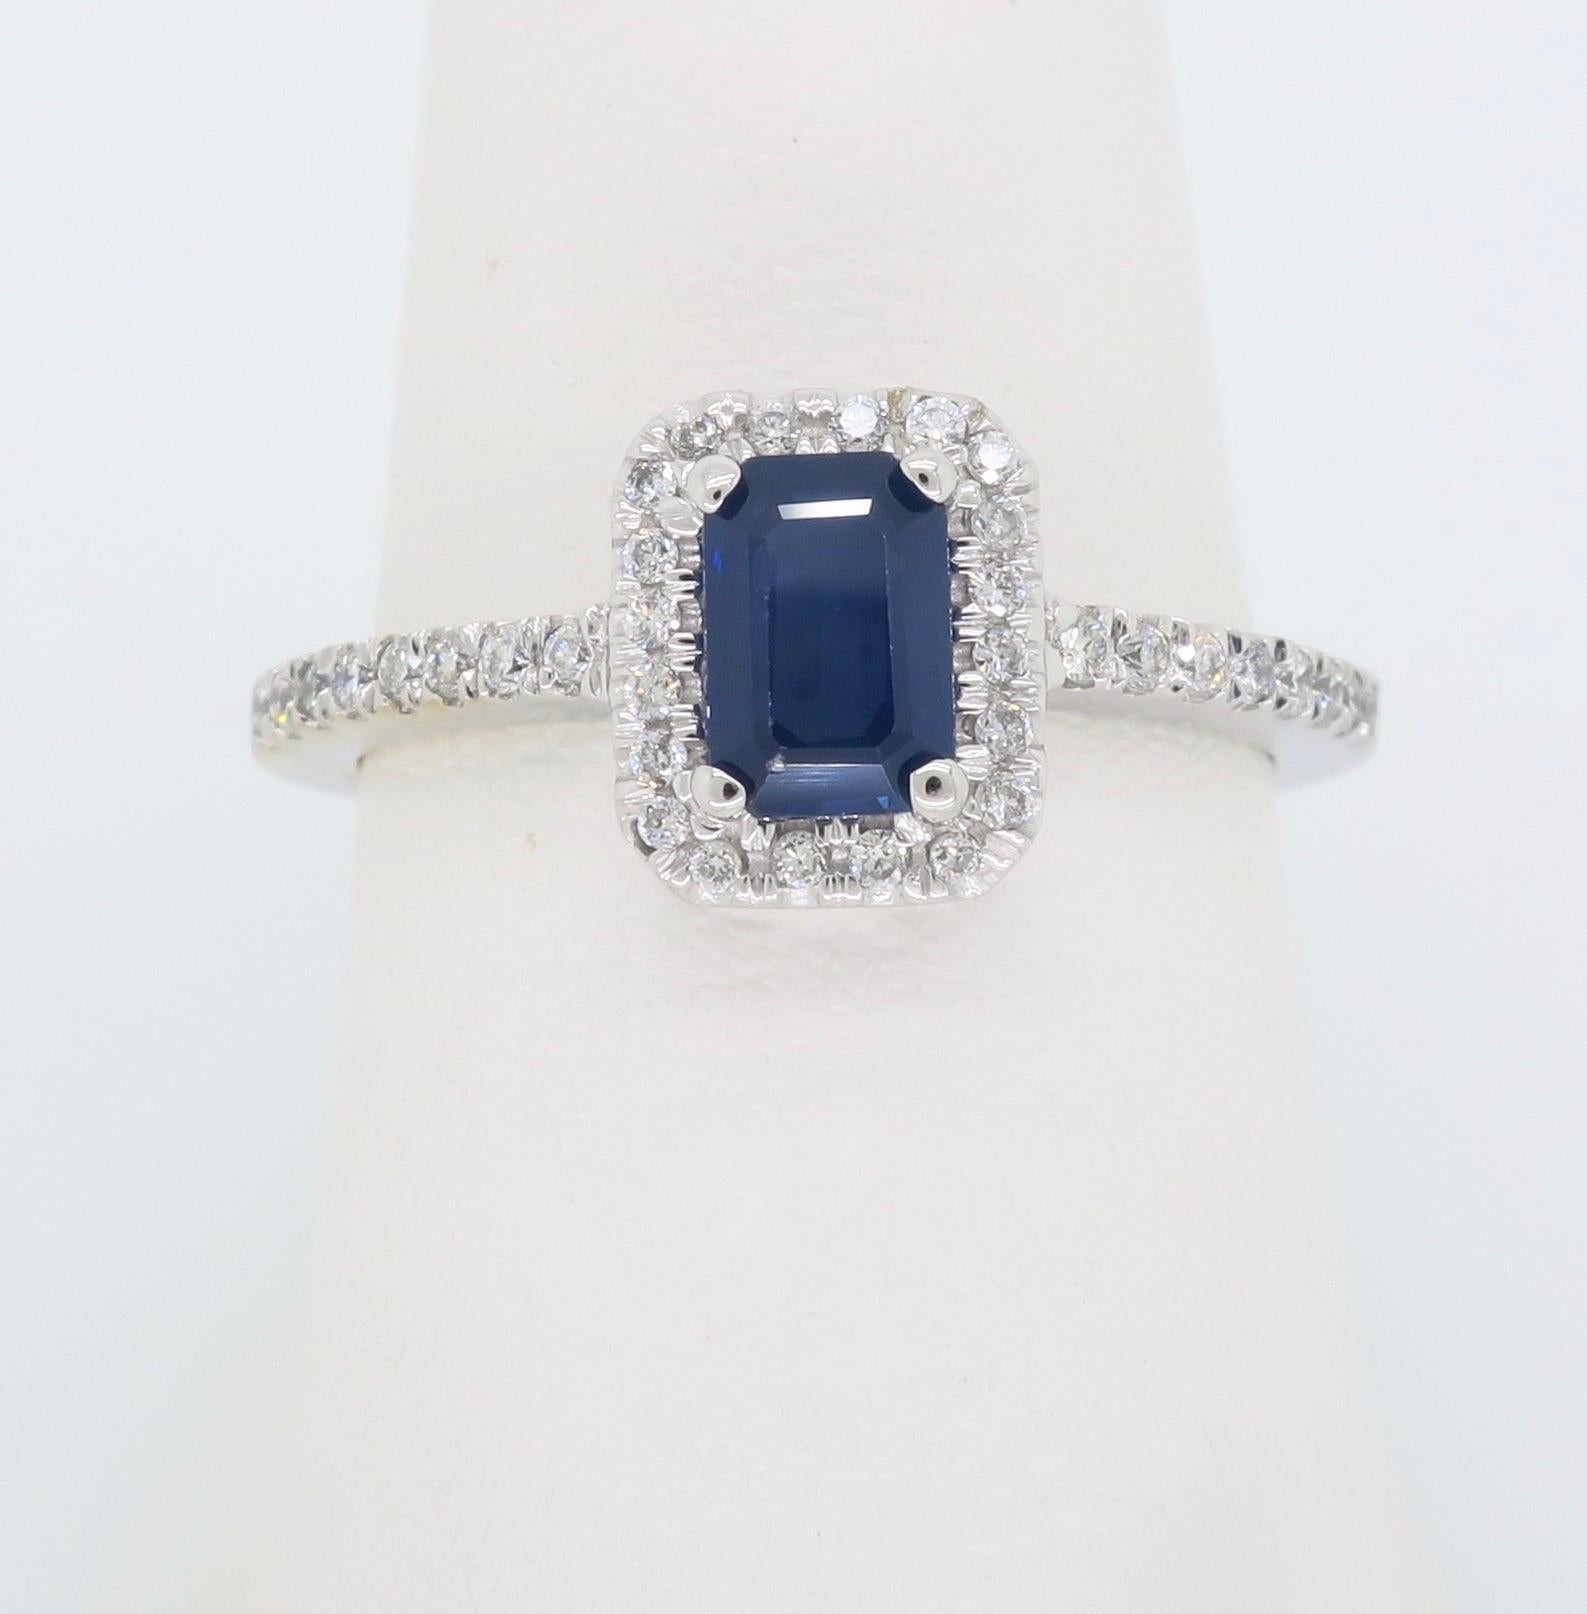 Halo style sapphire and diamond ring crafted in 14k white gold. 

Gemstone: Sapphire & Diamonds
Gemstone Carat Weight:  Approximately .63CT
Diamond Carat Weight:  Approximately .20CTW
Diamond Cut: Round Brilliant Cut
Color: Average G-J
Clarity: